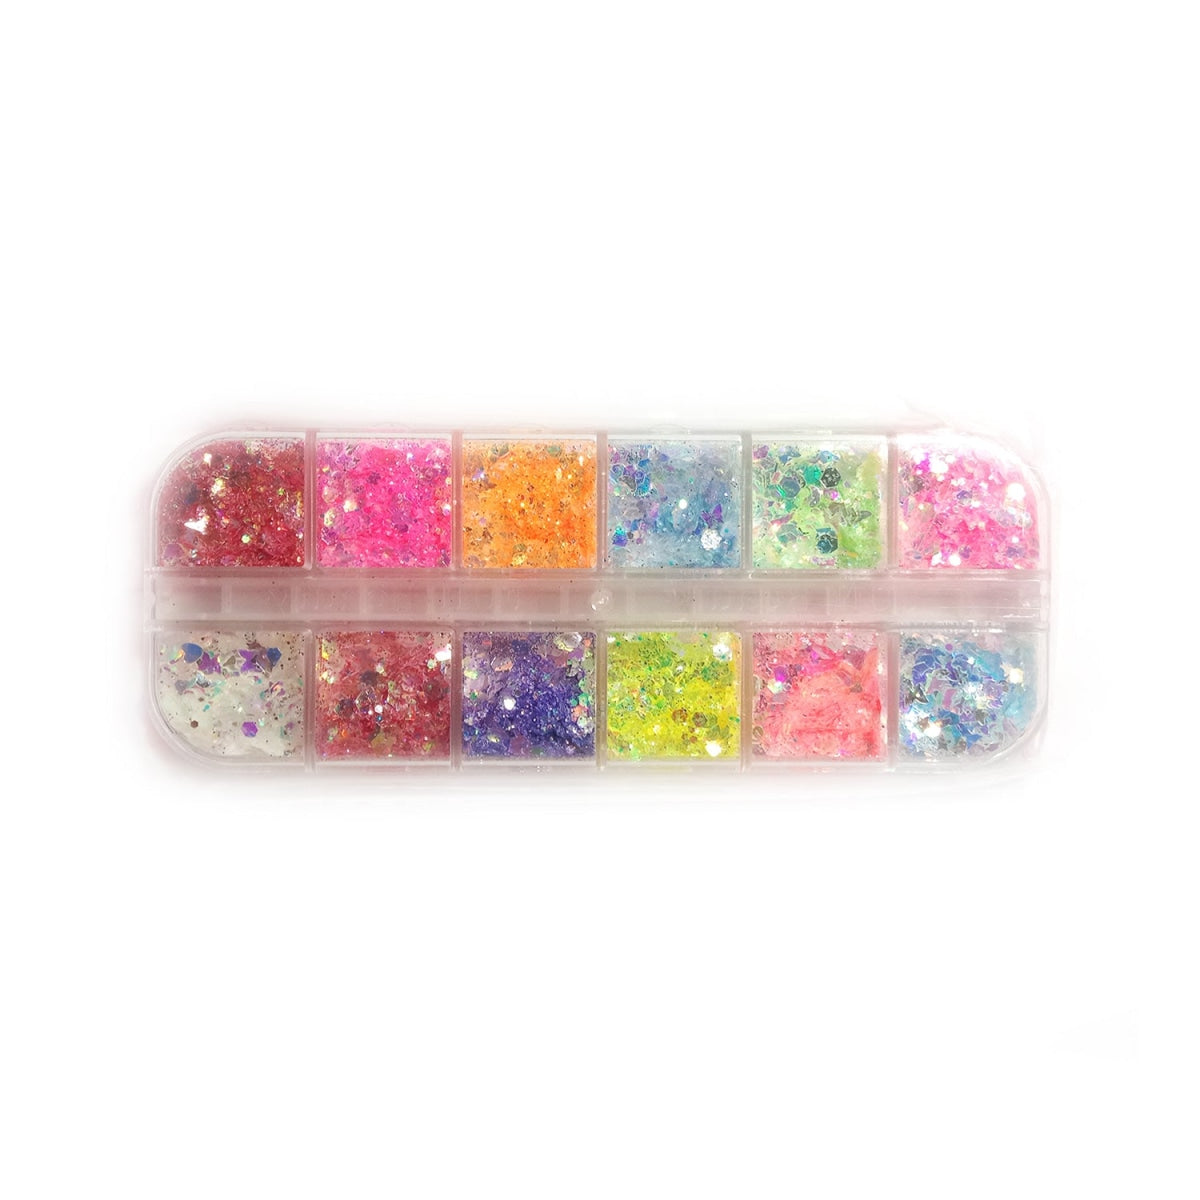 Holographic Nail Paillette Fruit Heart Butterfly Mirror Slices Art Sequins Flakes Hexagons - Tube